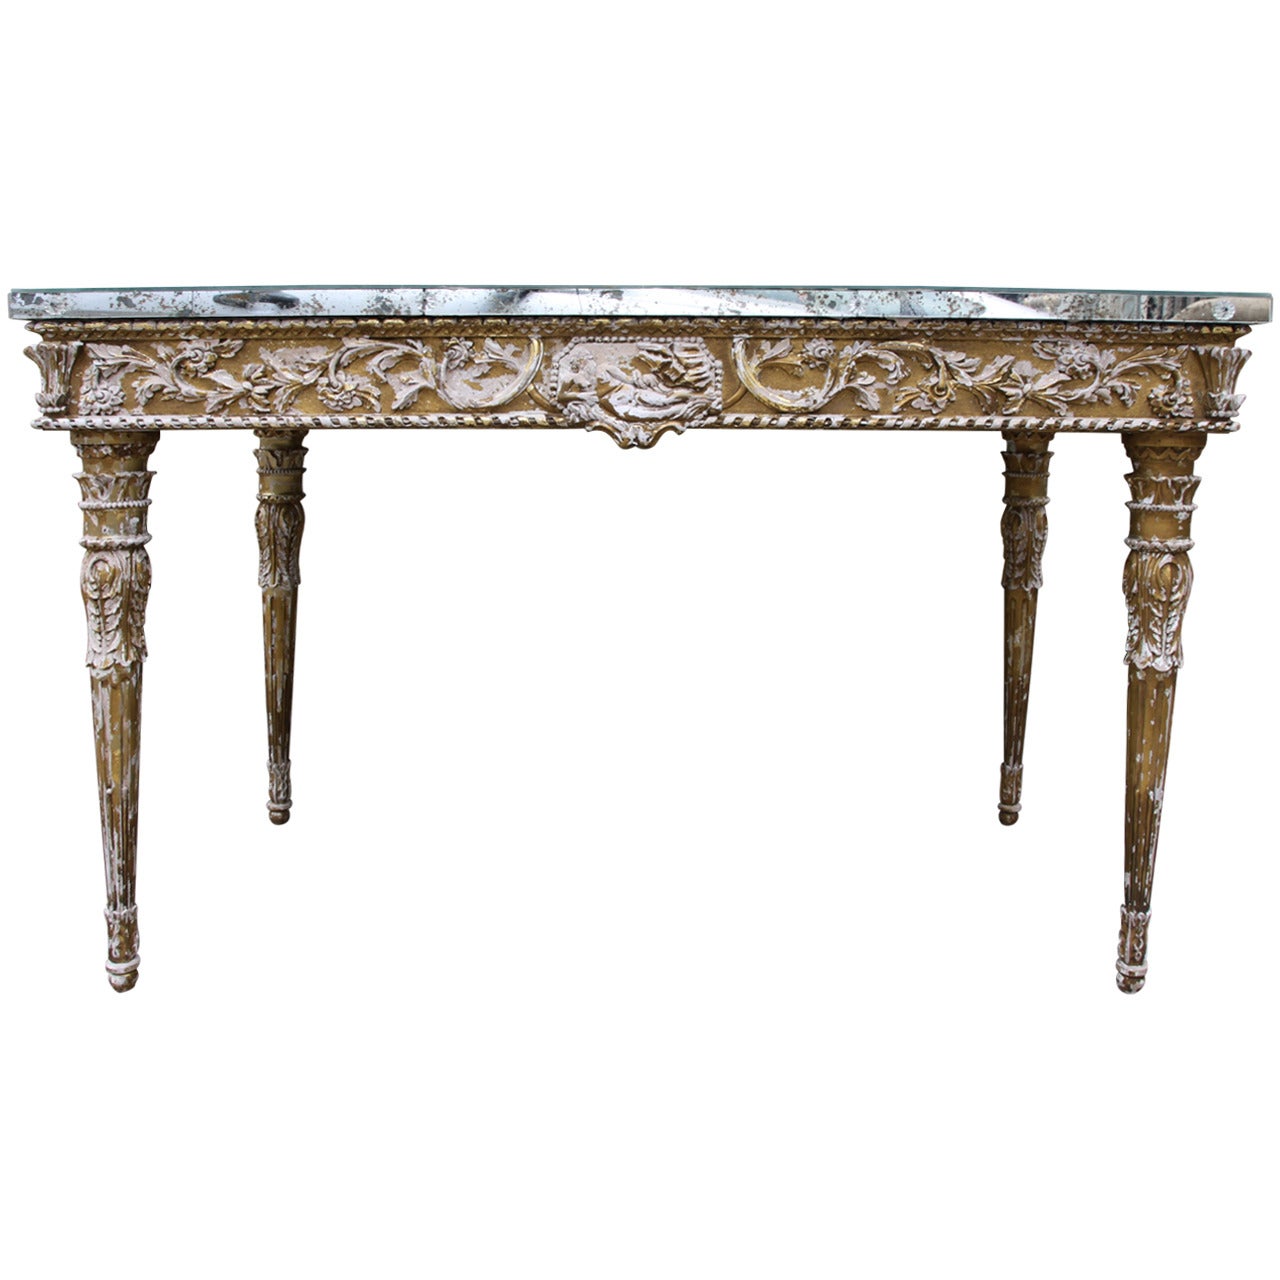 19th C. Italian Neoclassical Style Console with Antique Mirrored Top